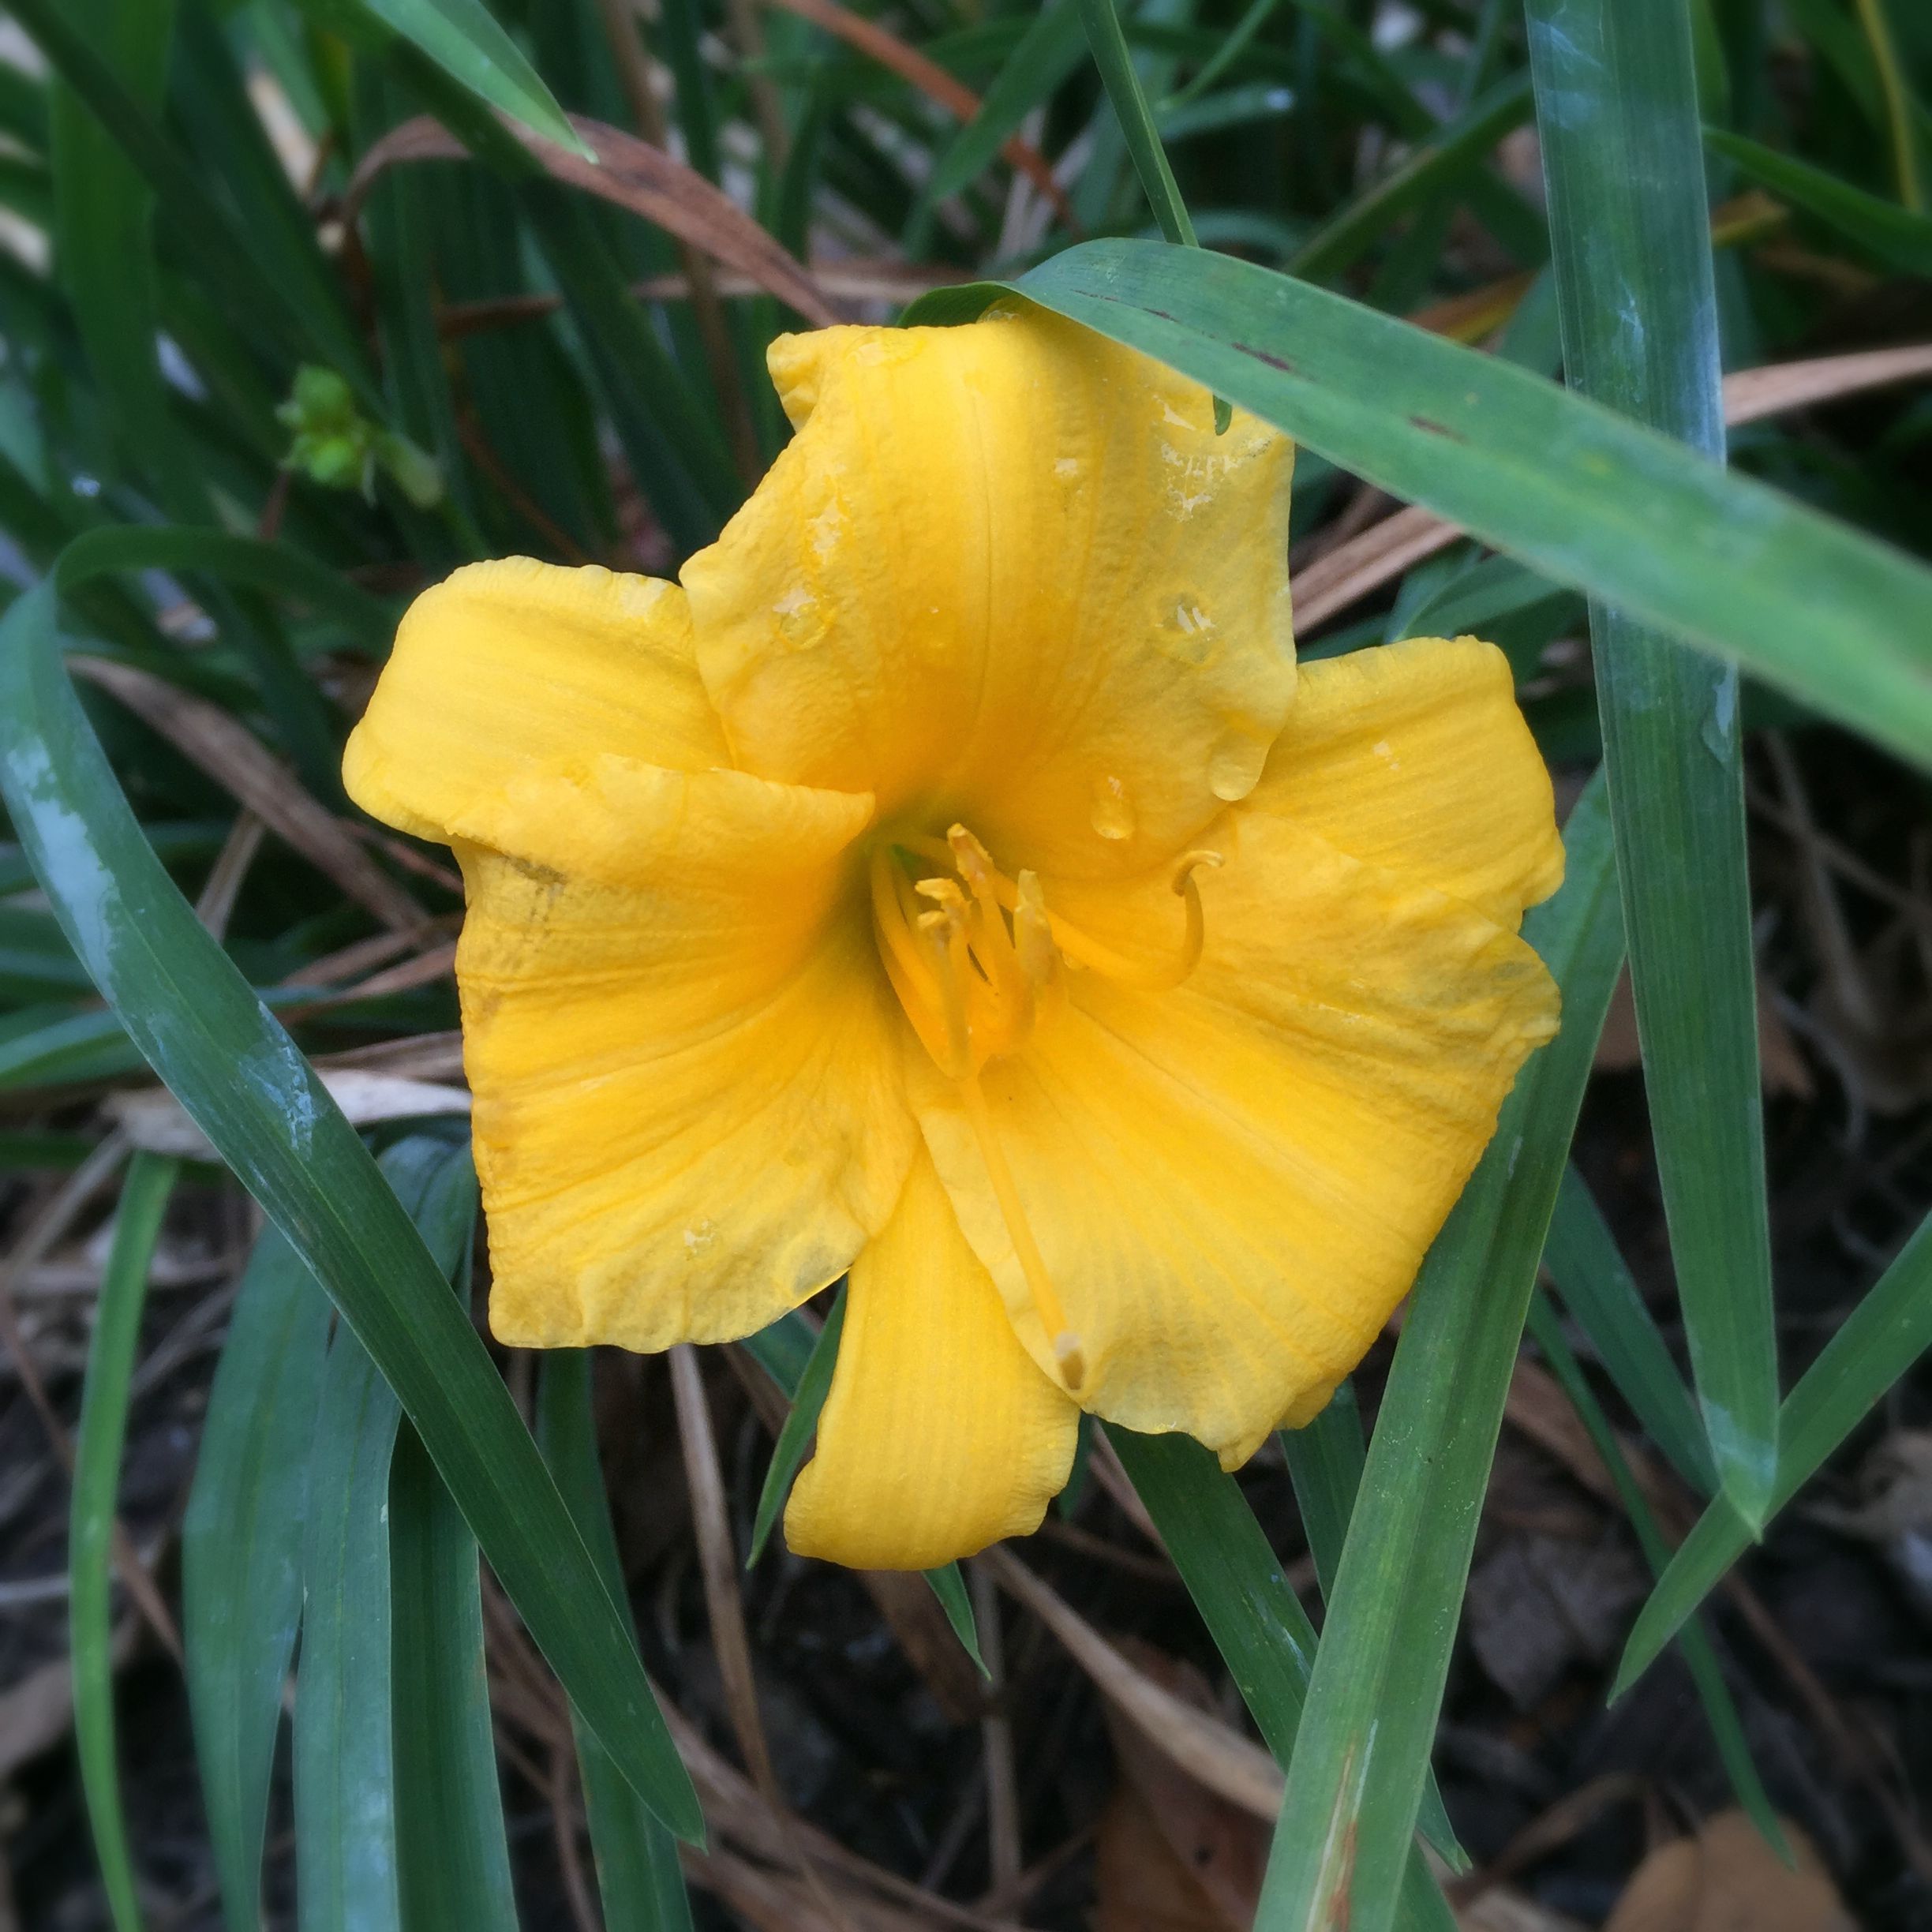 last daylily of the year?